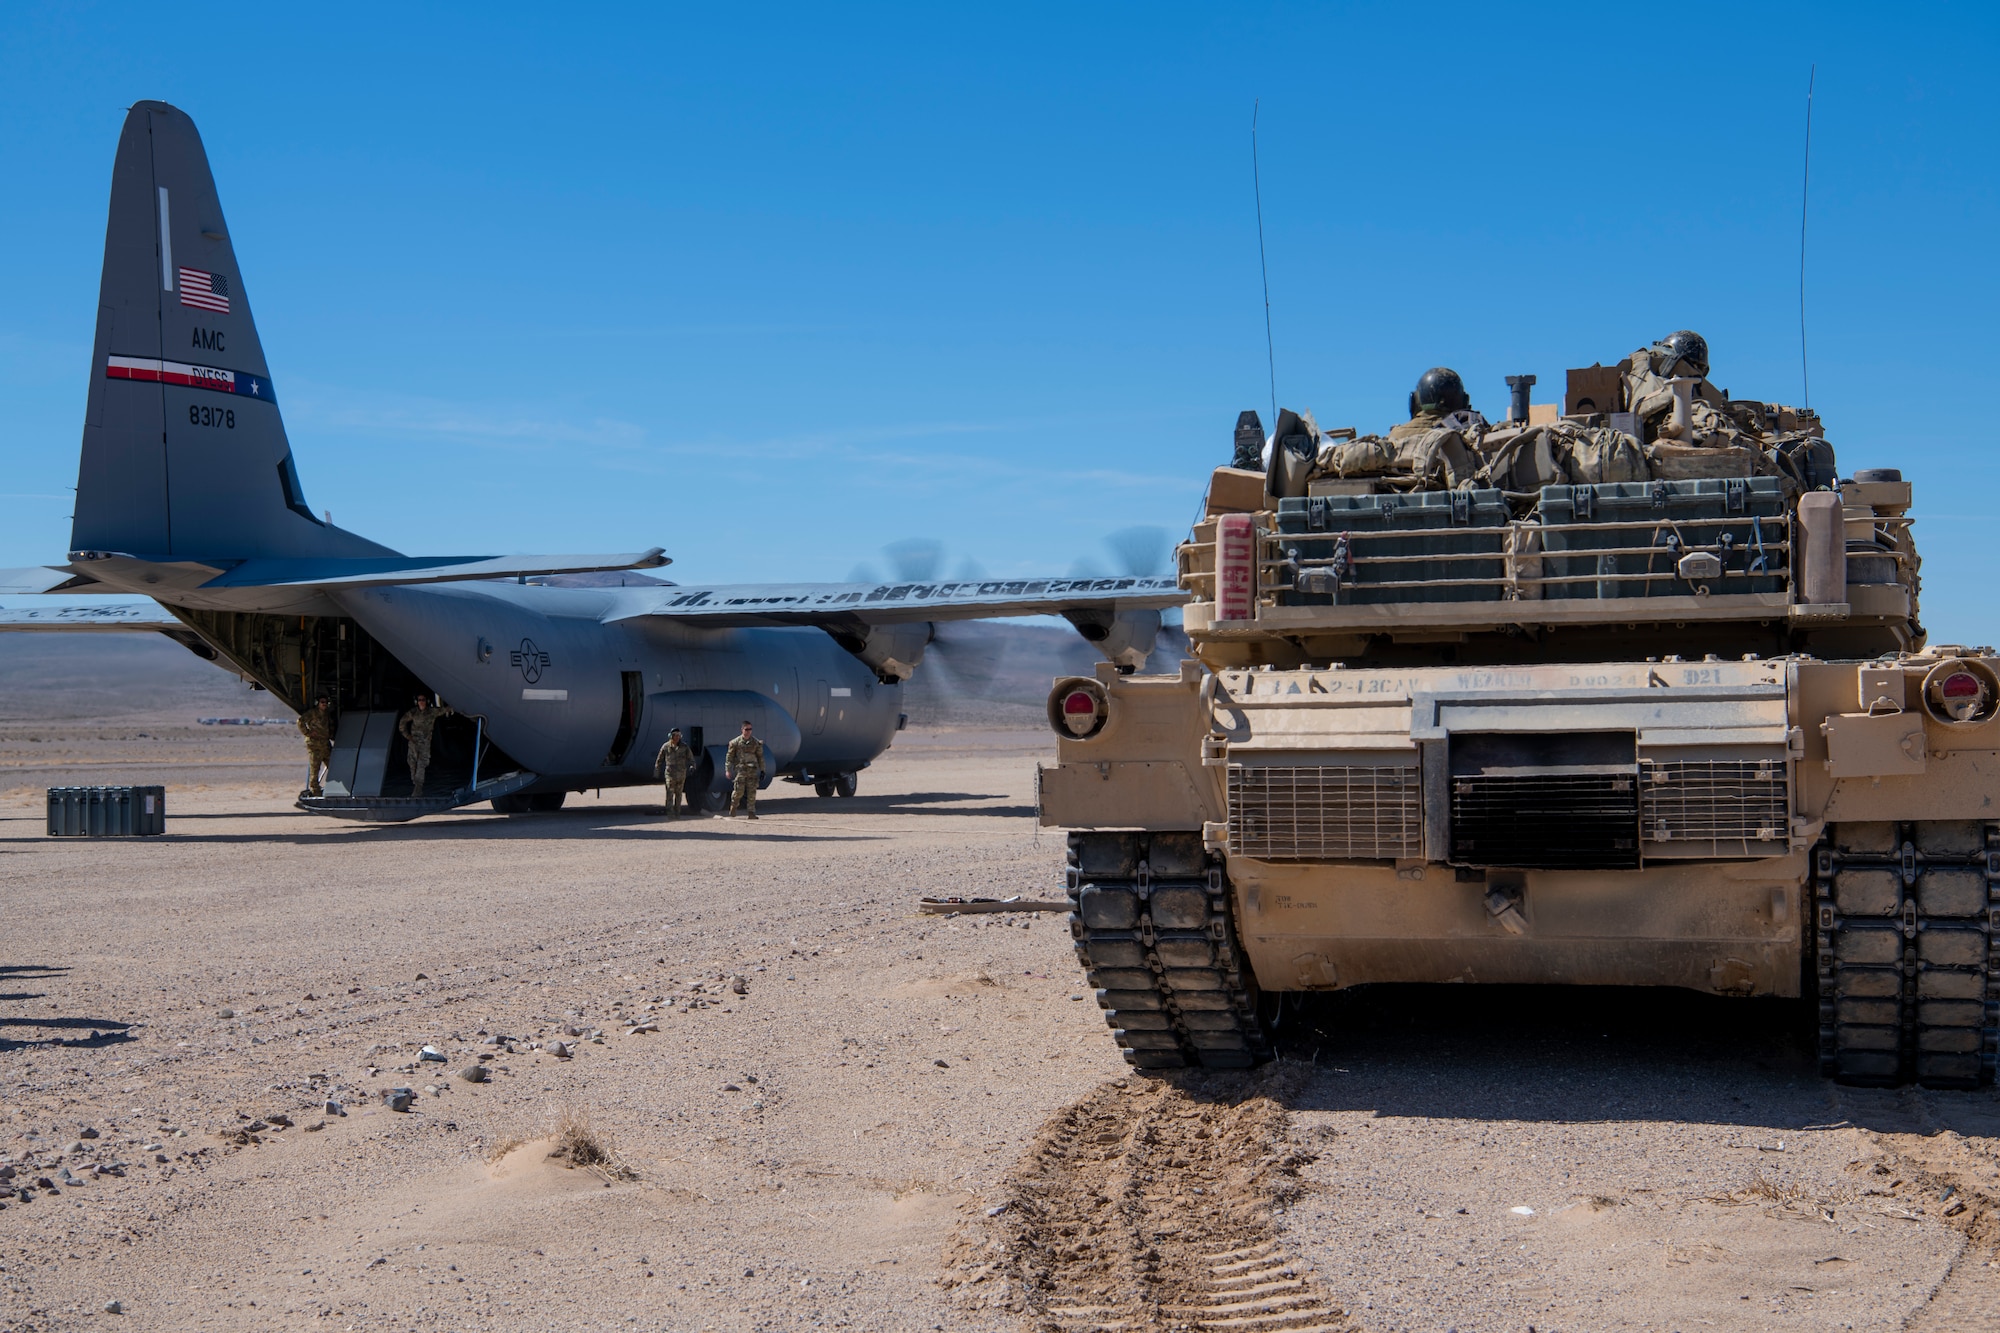 U.S. Army Soldiers from the 1st Armored Division park a M1A2 Abrams tank next to a C-130J Super Hercules in the California desert during Operation Night King March 26, 2023.